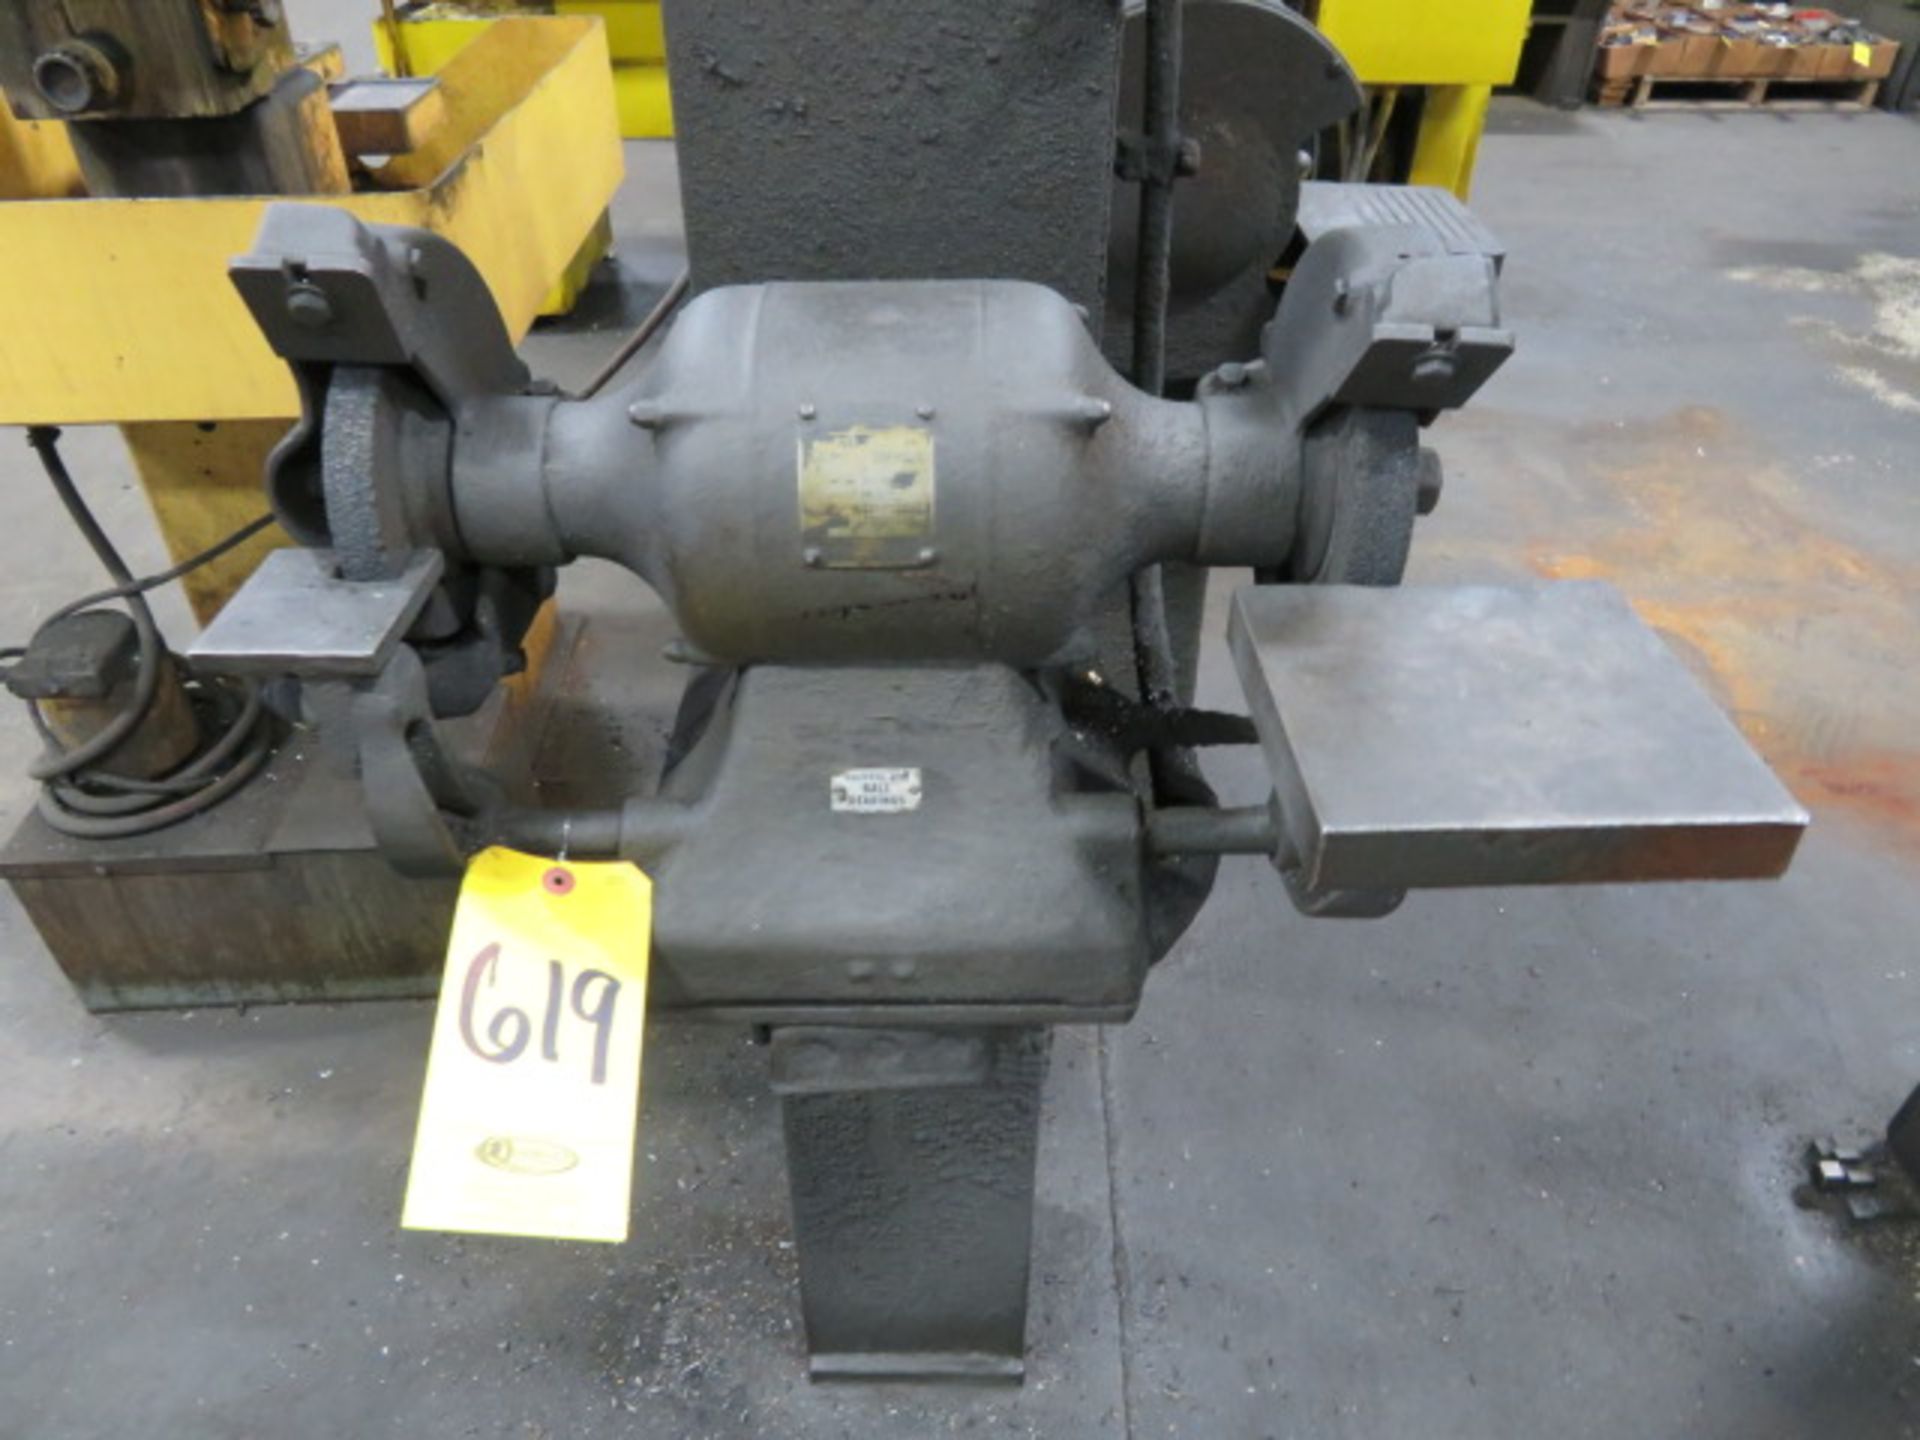 7" DOUBLE END GRINDER, 1/2HP, MOUNTED TO I-BEAM